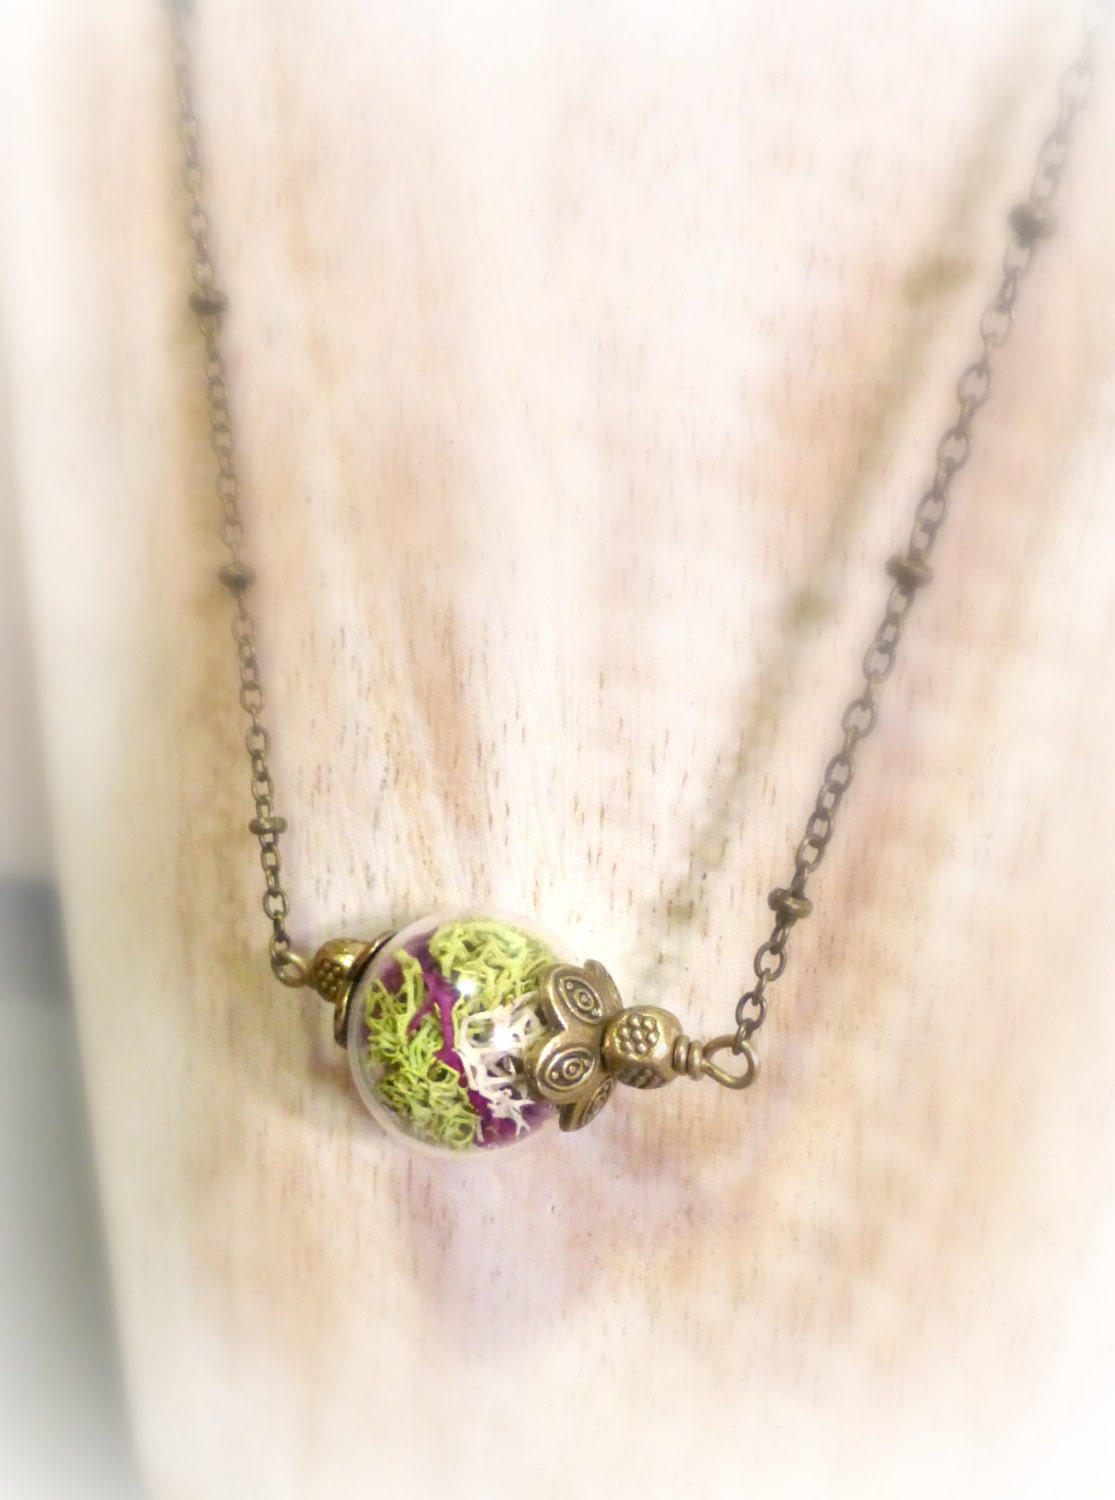 Real Moss Necklace Terrarium Necklace Nature Orb Necklace - Etsy